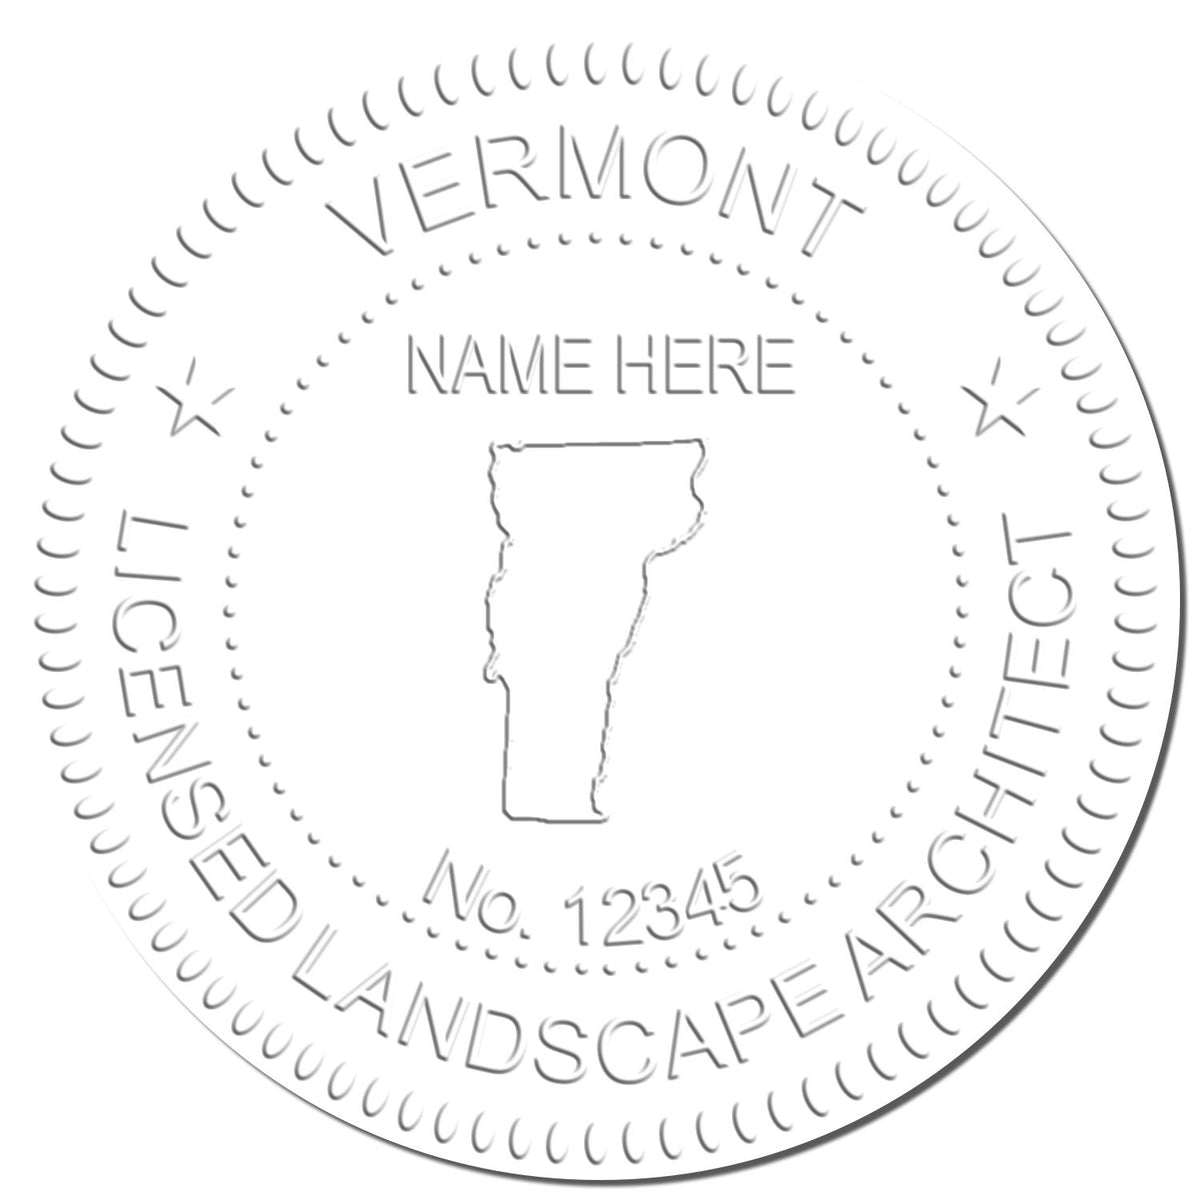 This paper is stamped with a sample imprint of the Soft Pocket Vermont Landscape Architect Embosser, signifying its quality and reliability.